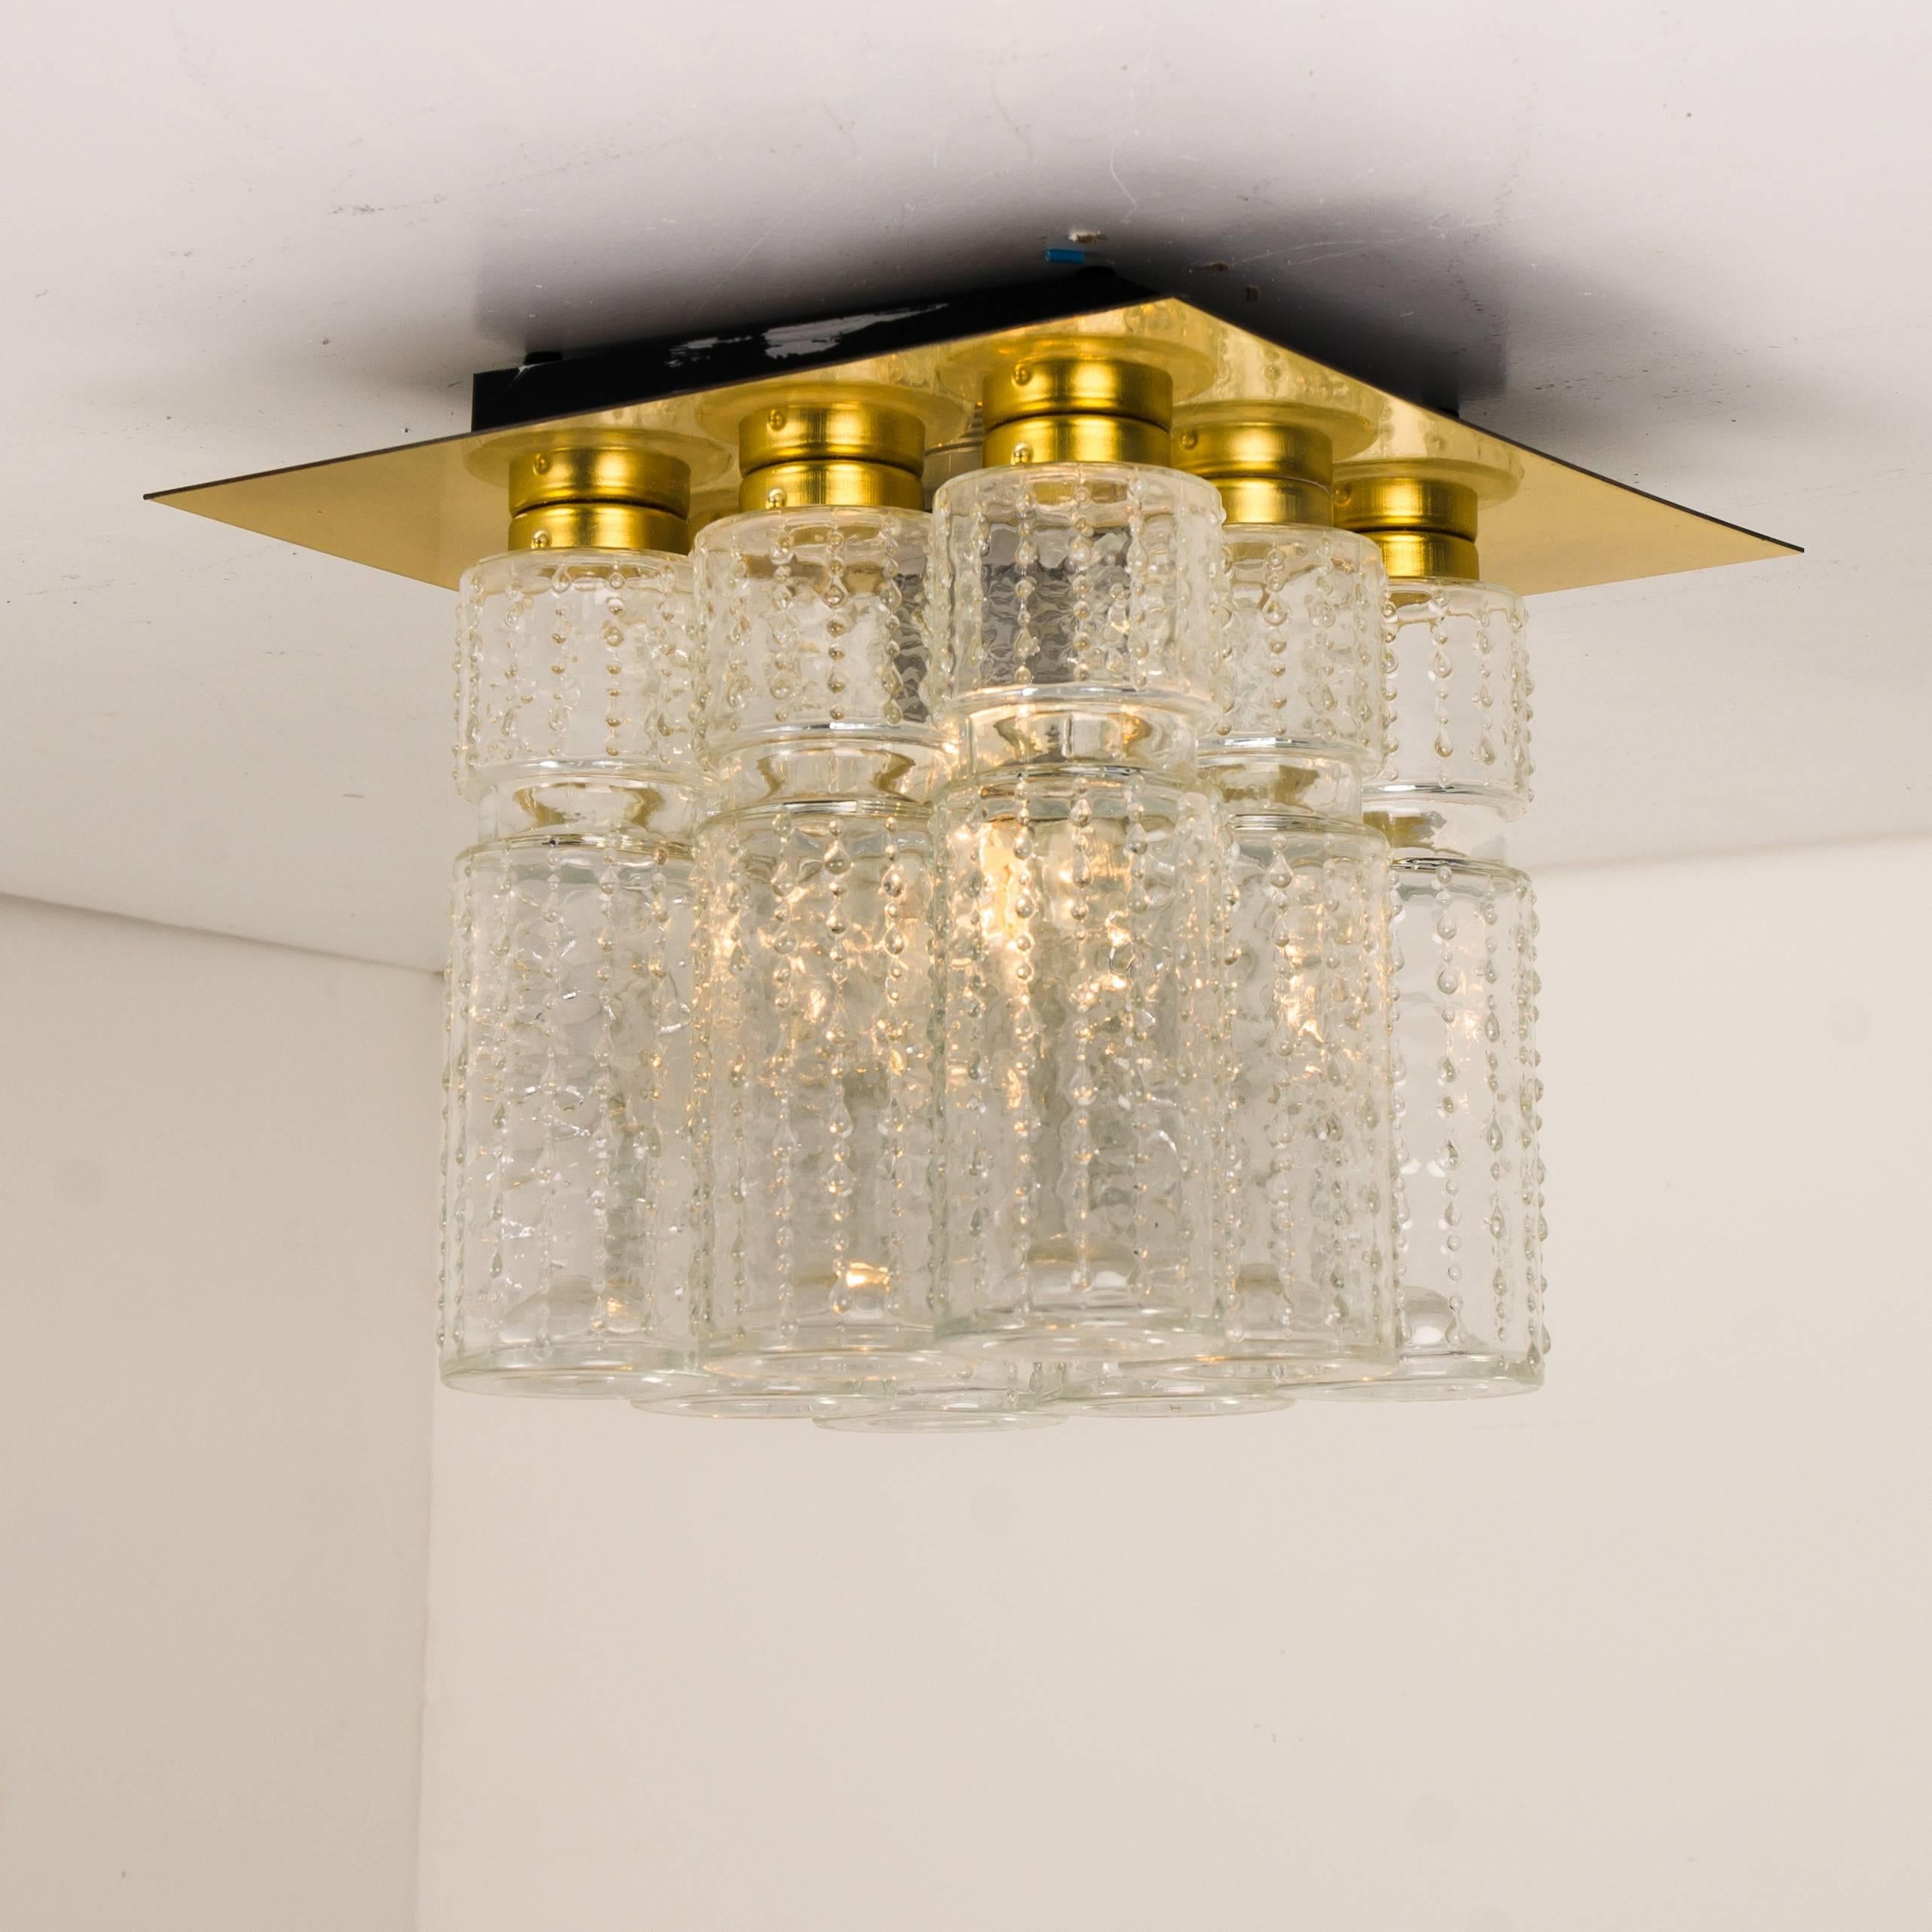 Amazing flush mount chandelier with eight hanging hand blow textured hollow glass prisms mounted on a brass frame. Made by Glashütte Limburg in Germany designed by Boris Tabacoff in the 1970s.

Excellent original condition. Fitted with one E27